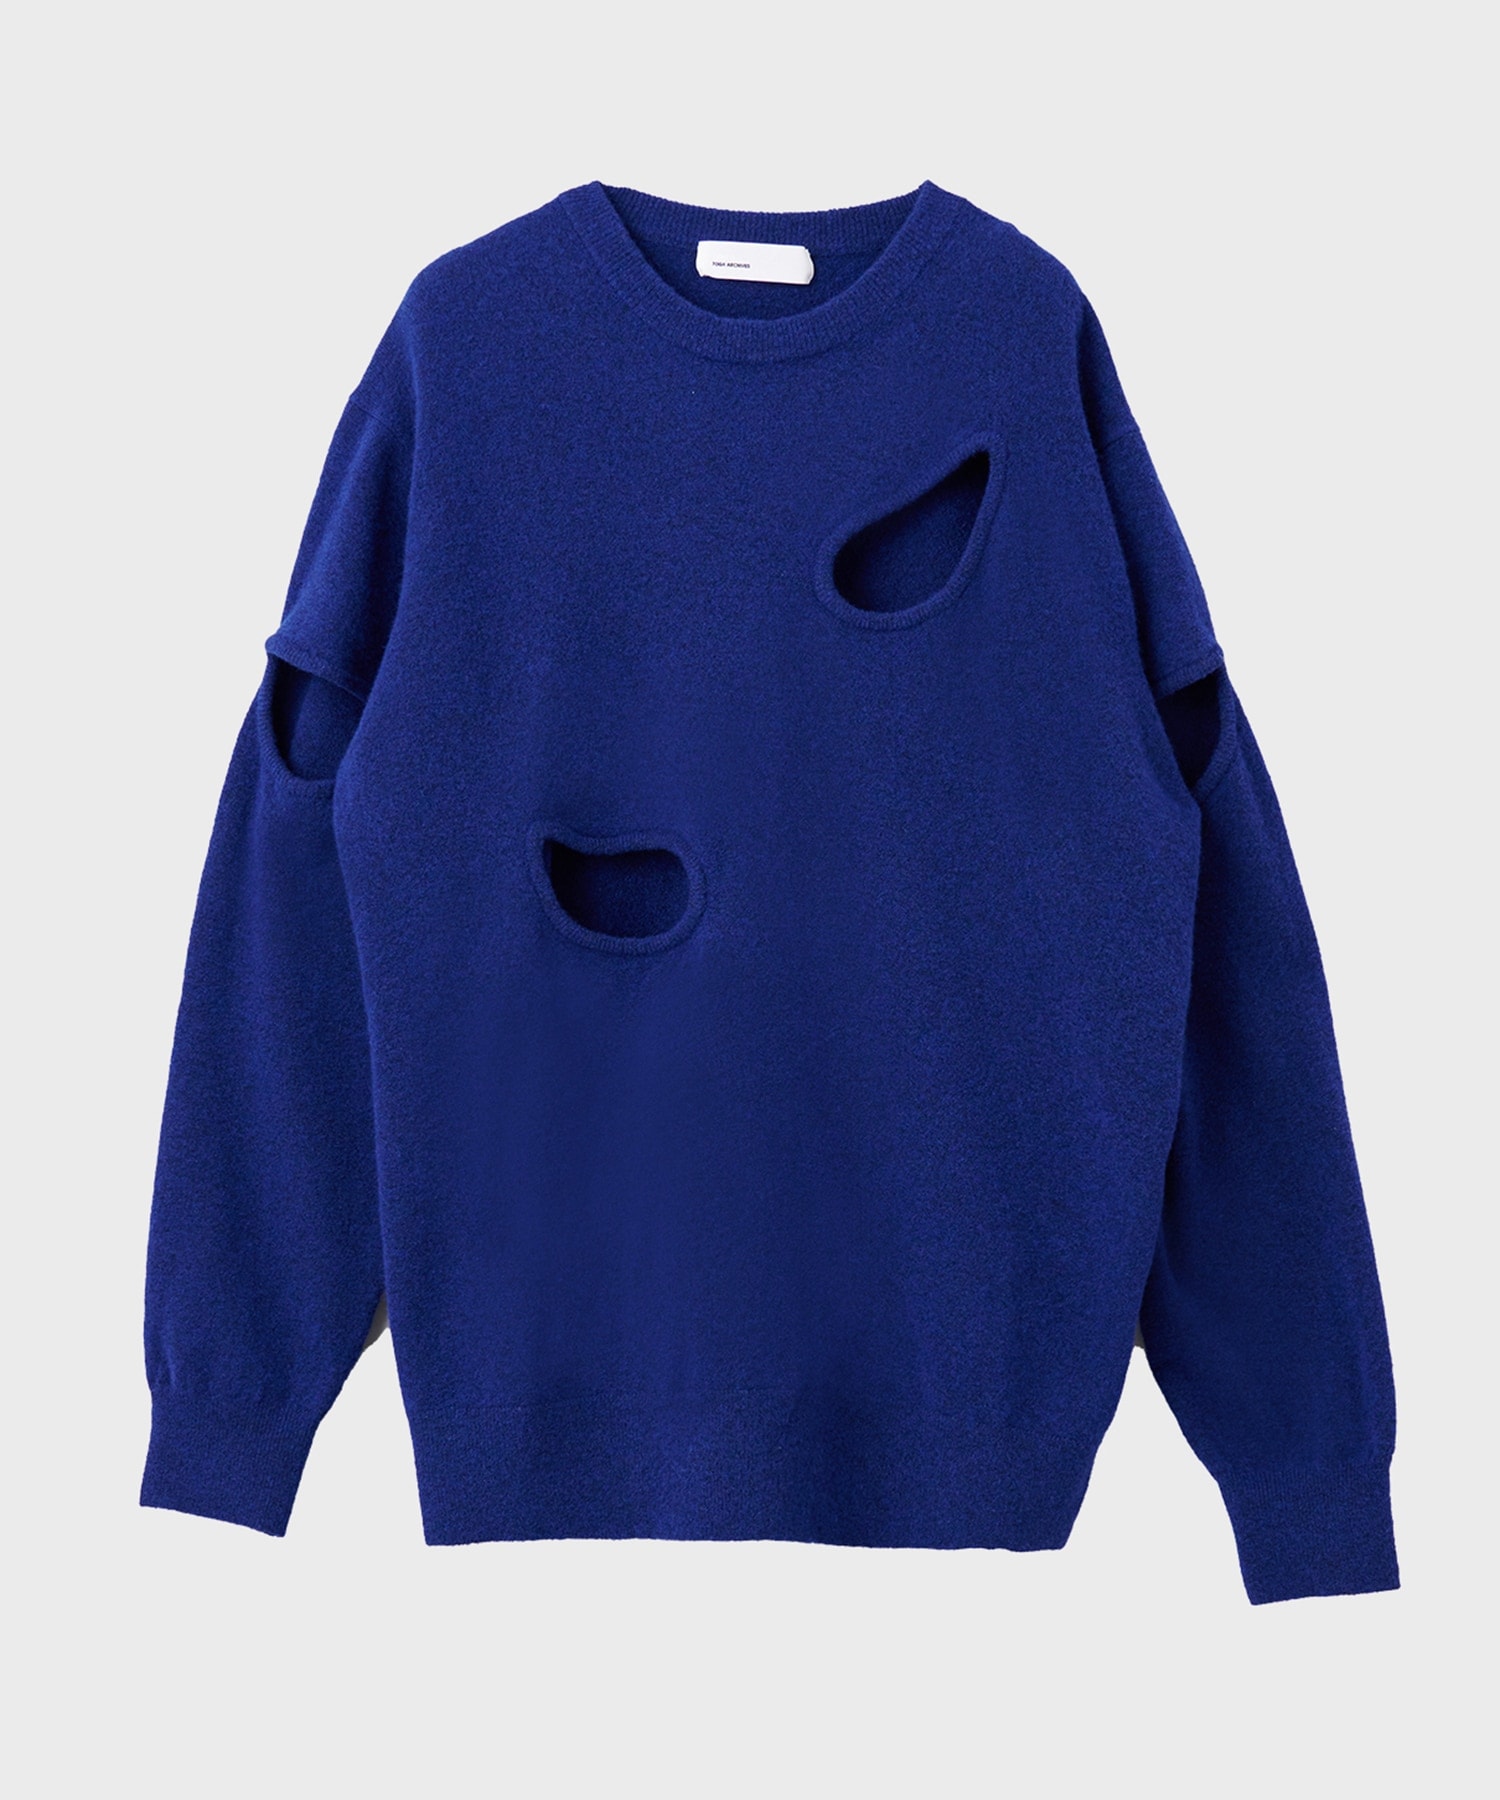 Hole knit pullover